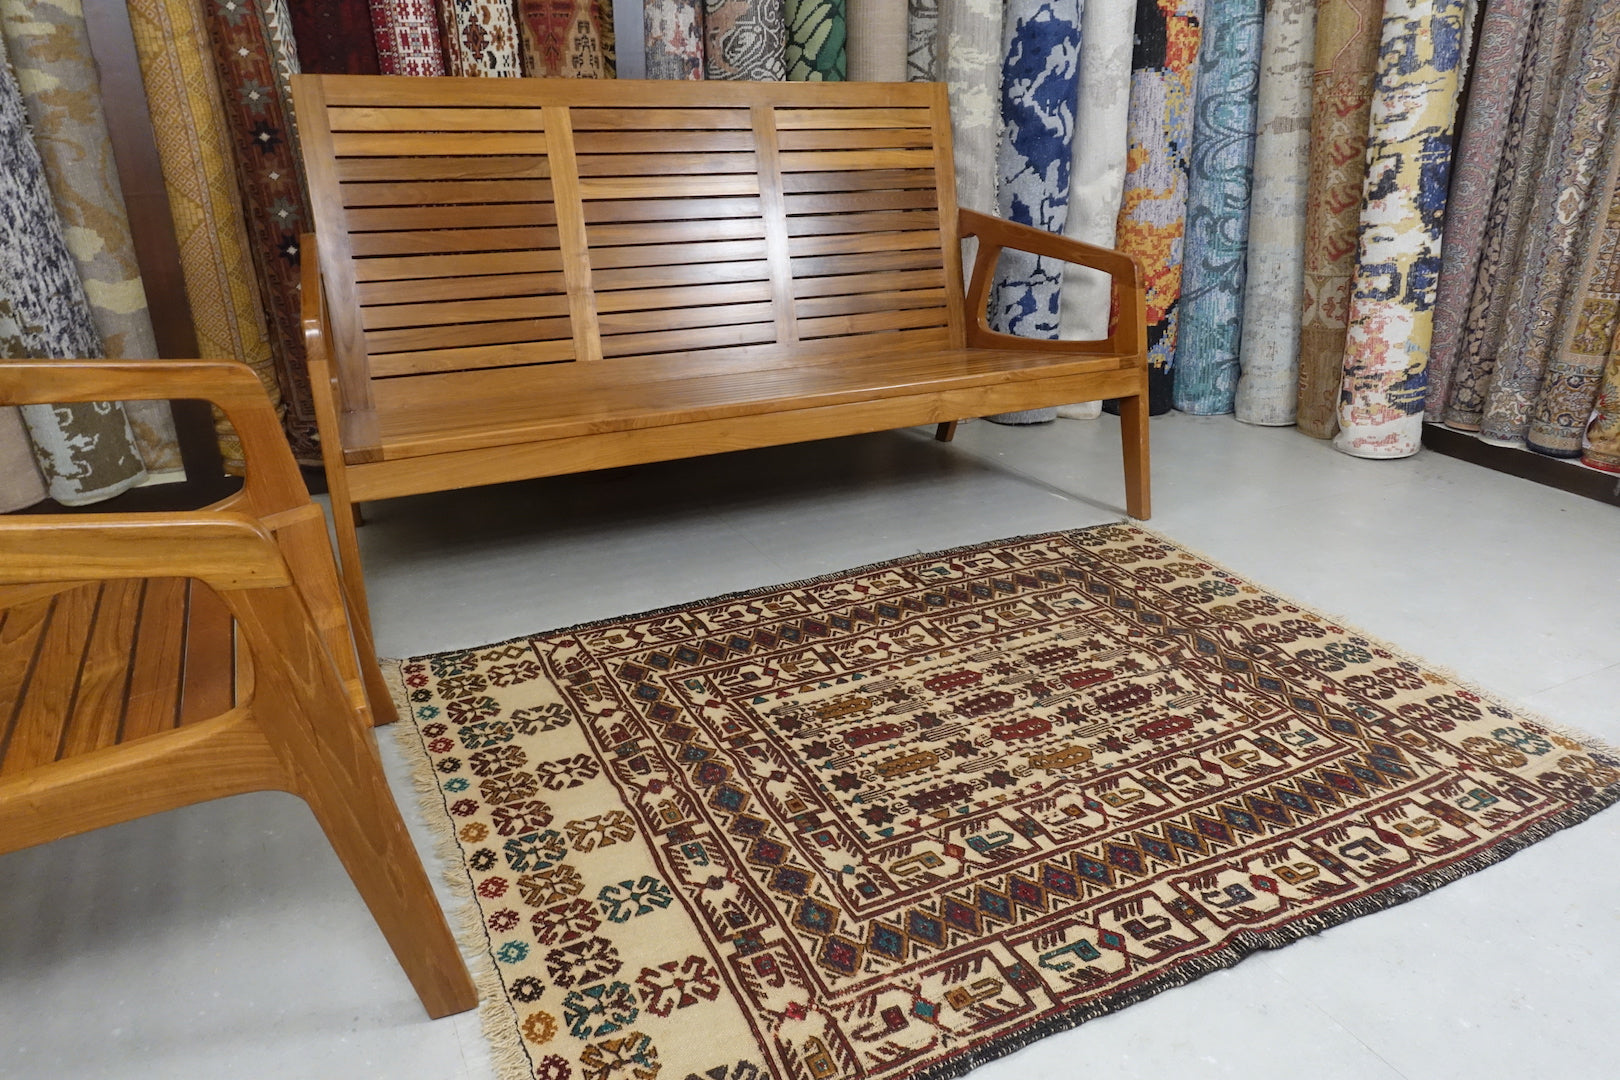 A 3.8 feet by 5 feet wool kilim, the colours used on the rug are blue, beige, brown and tan.